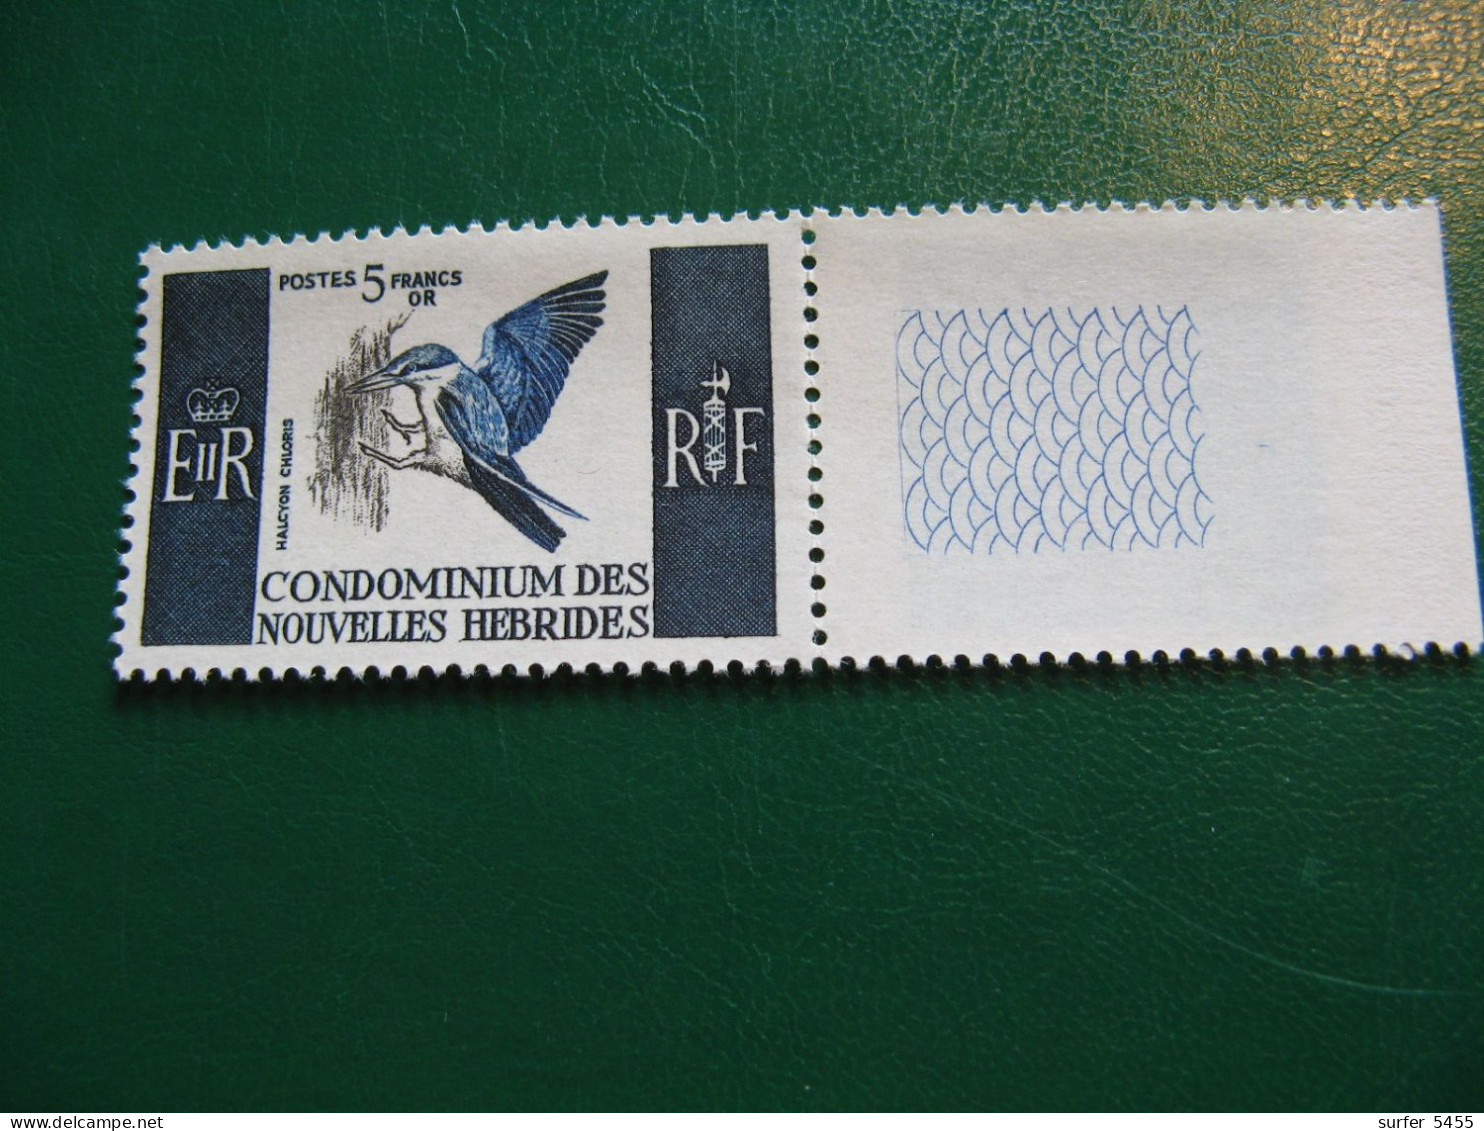 NOUVELLES HEBRIDES POSTE ORDINAIRE N° 255 TIMBRE NEUF** LUXE COTE 40,00 EUROS - Unused Stamps